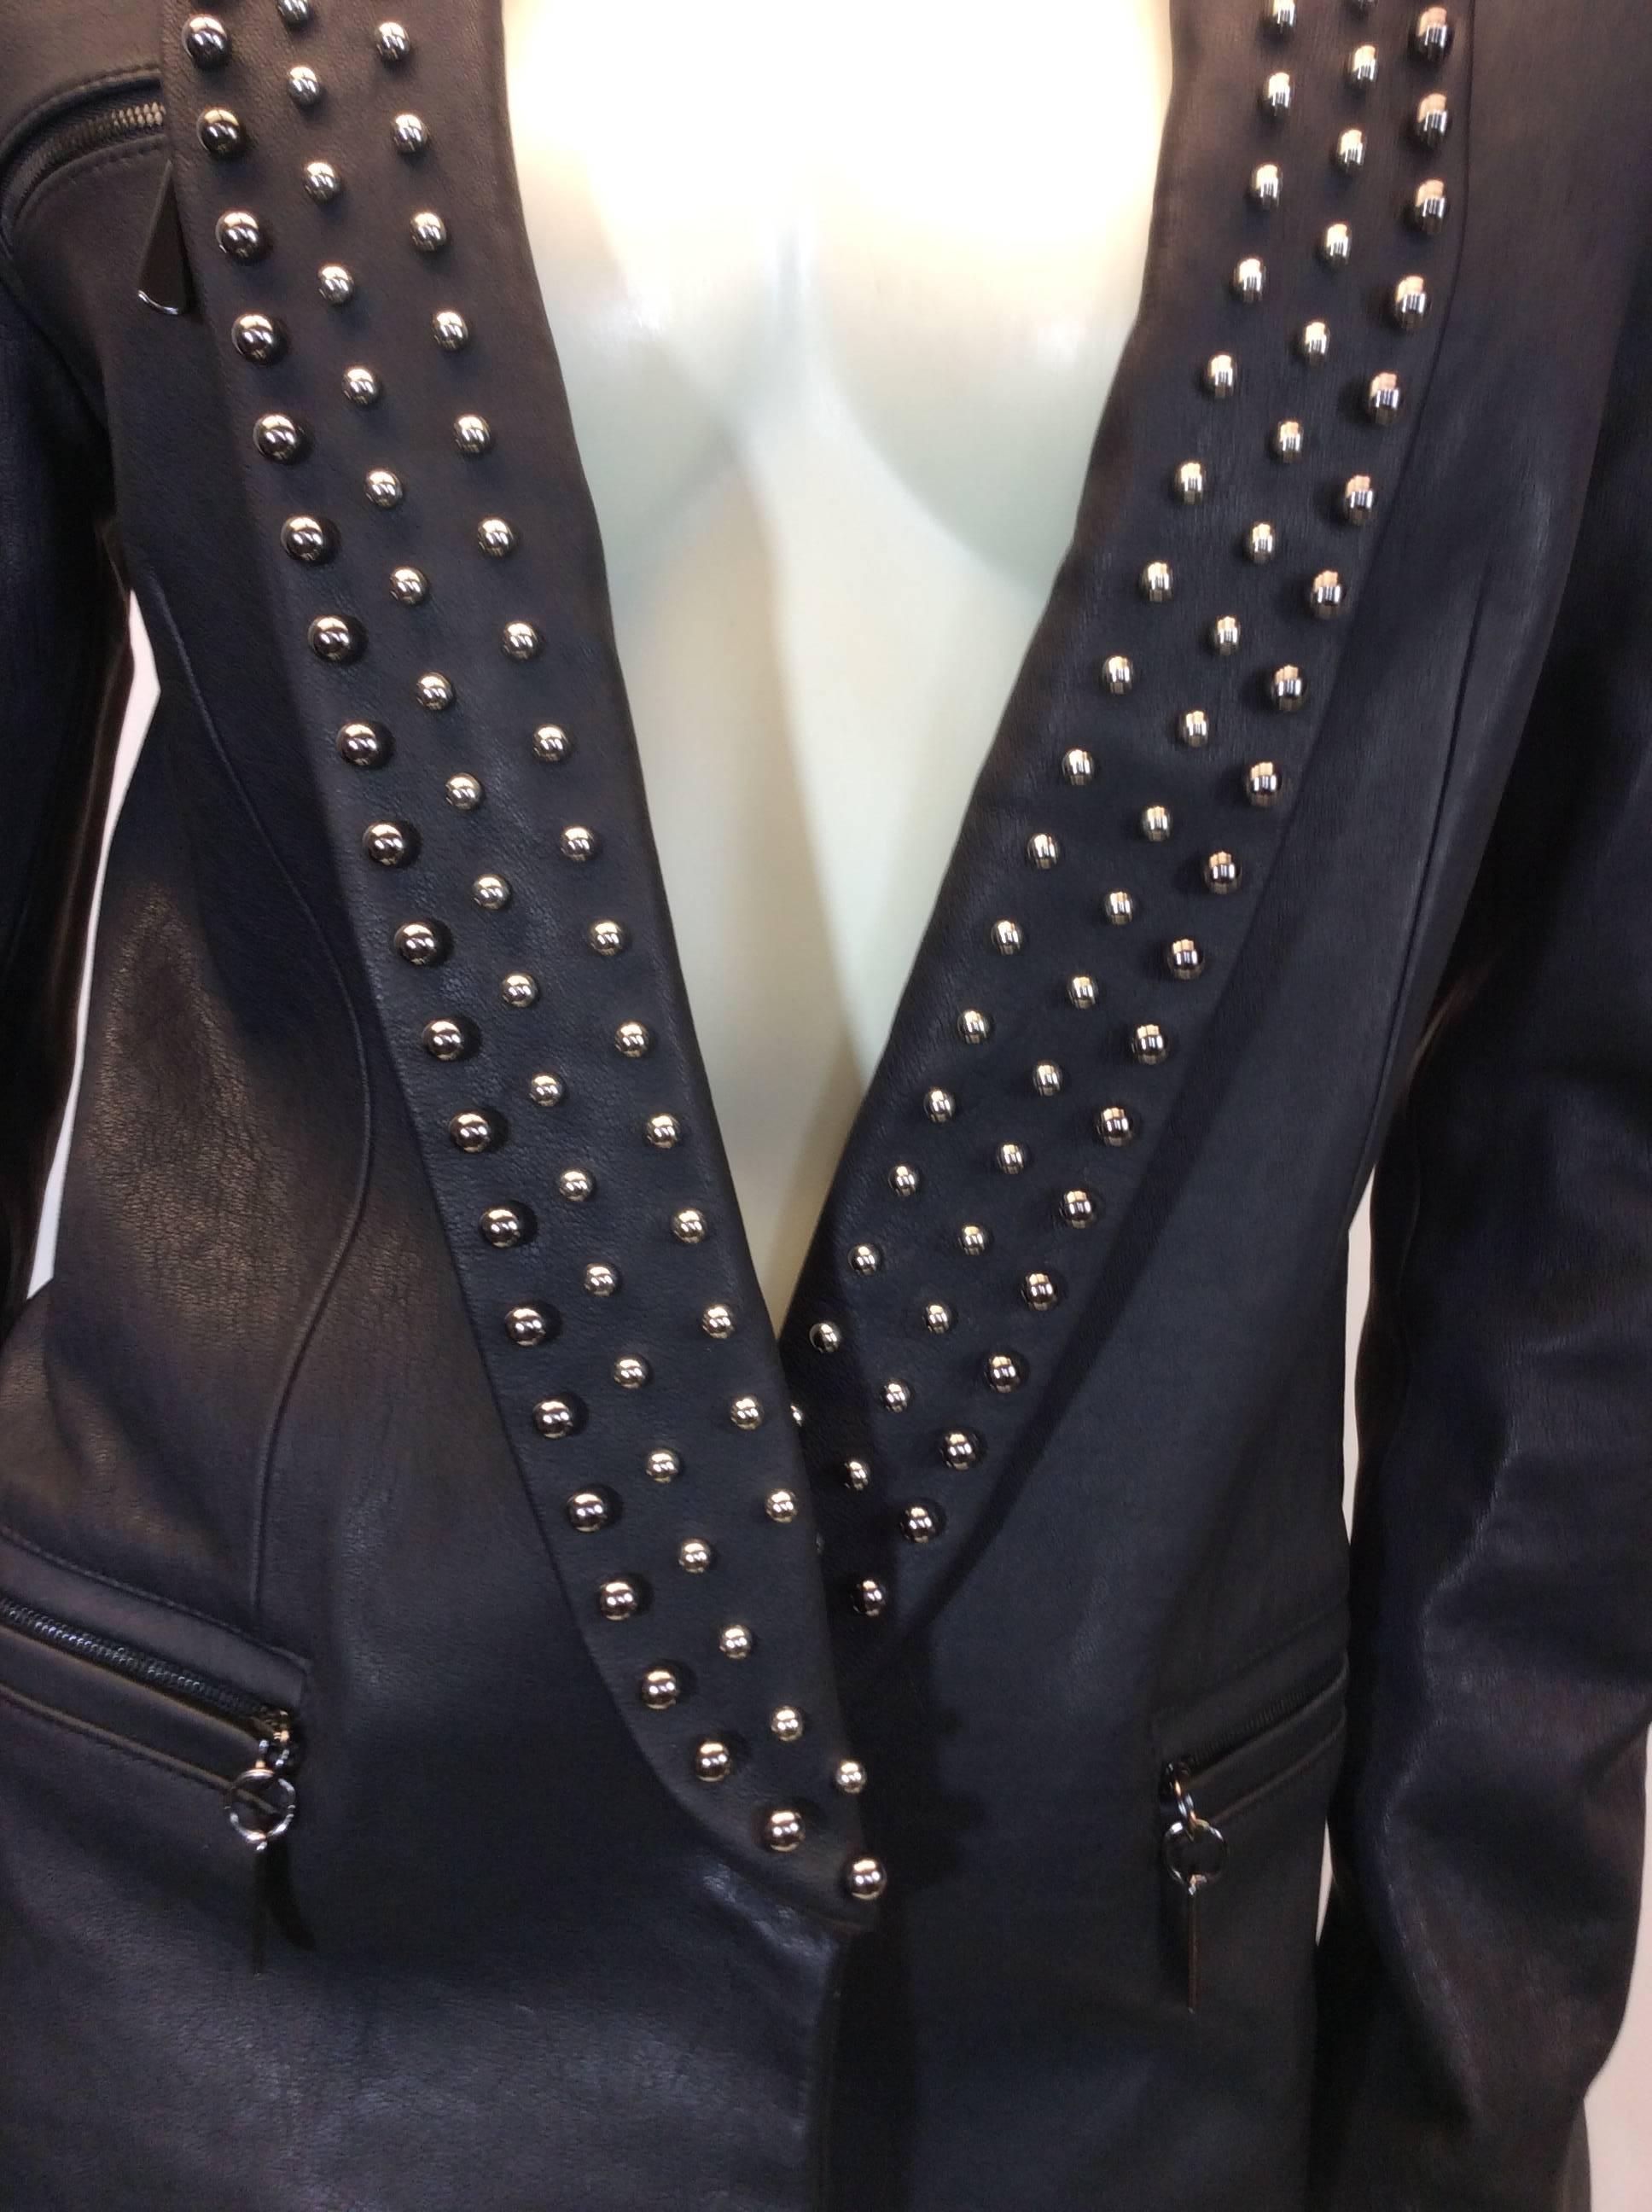 Thomas Wylde Leather Studded Black Blazer
Made in Korea
$599
Fully lined interior, 91% silk, 9% spandex
Middle snap button closure
Size small
100% lamb skin exterior with silver toned studded embellishments